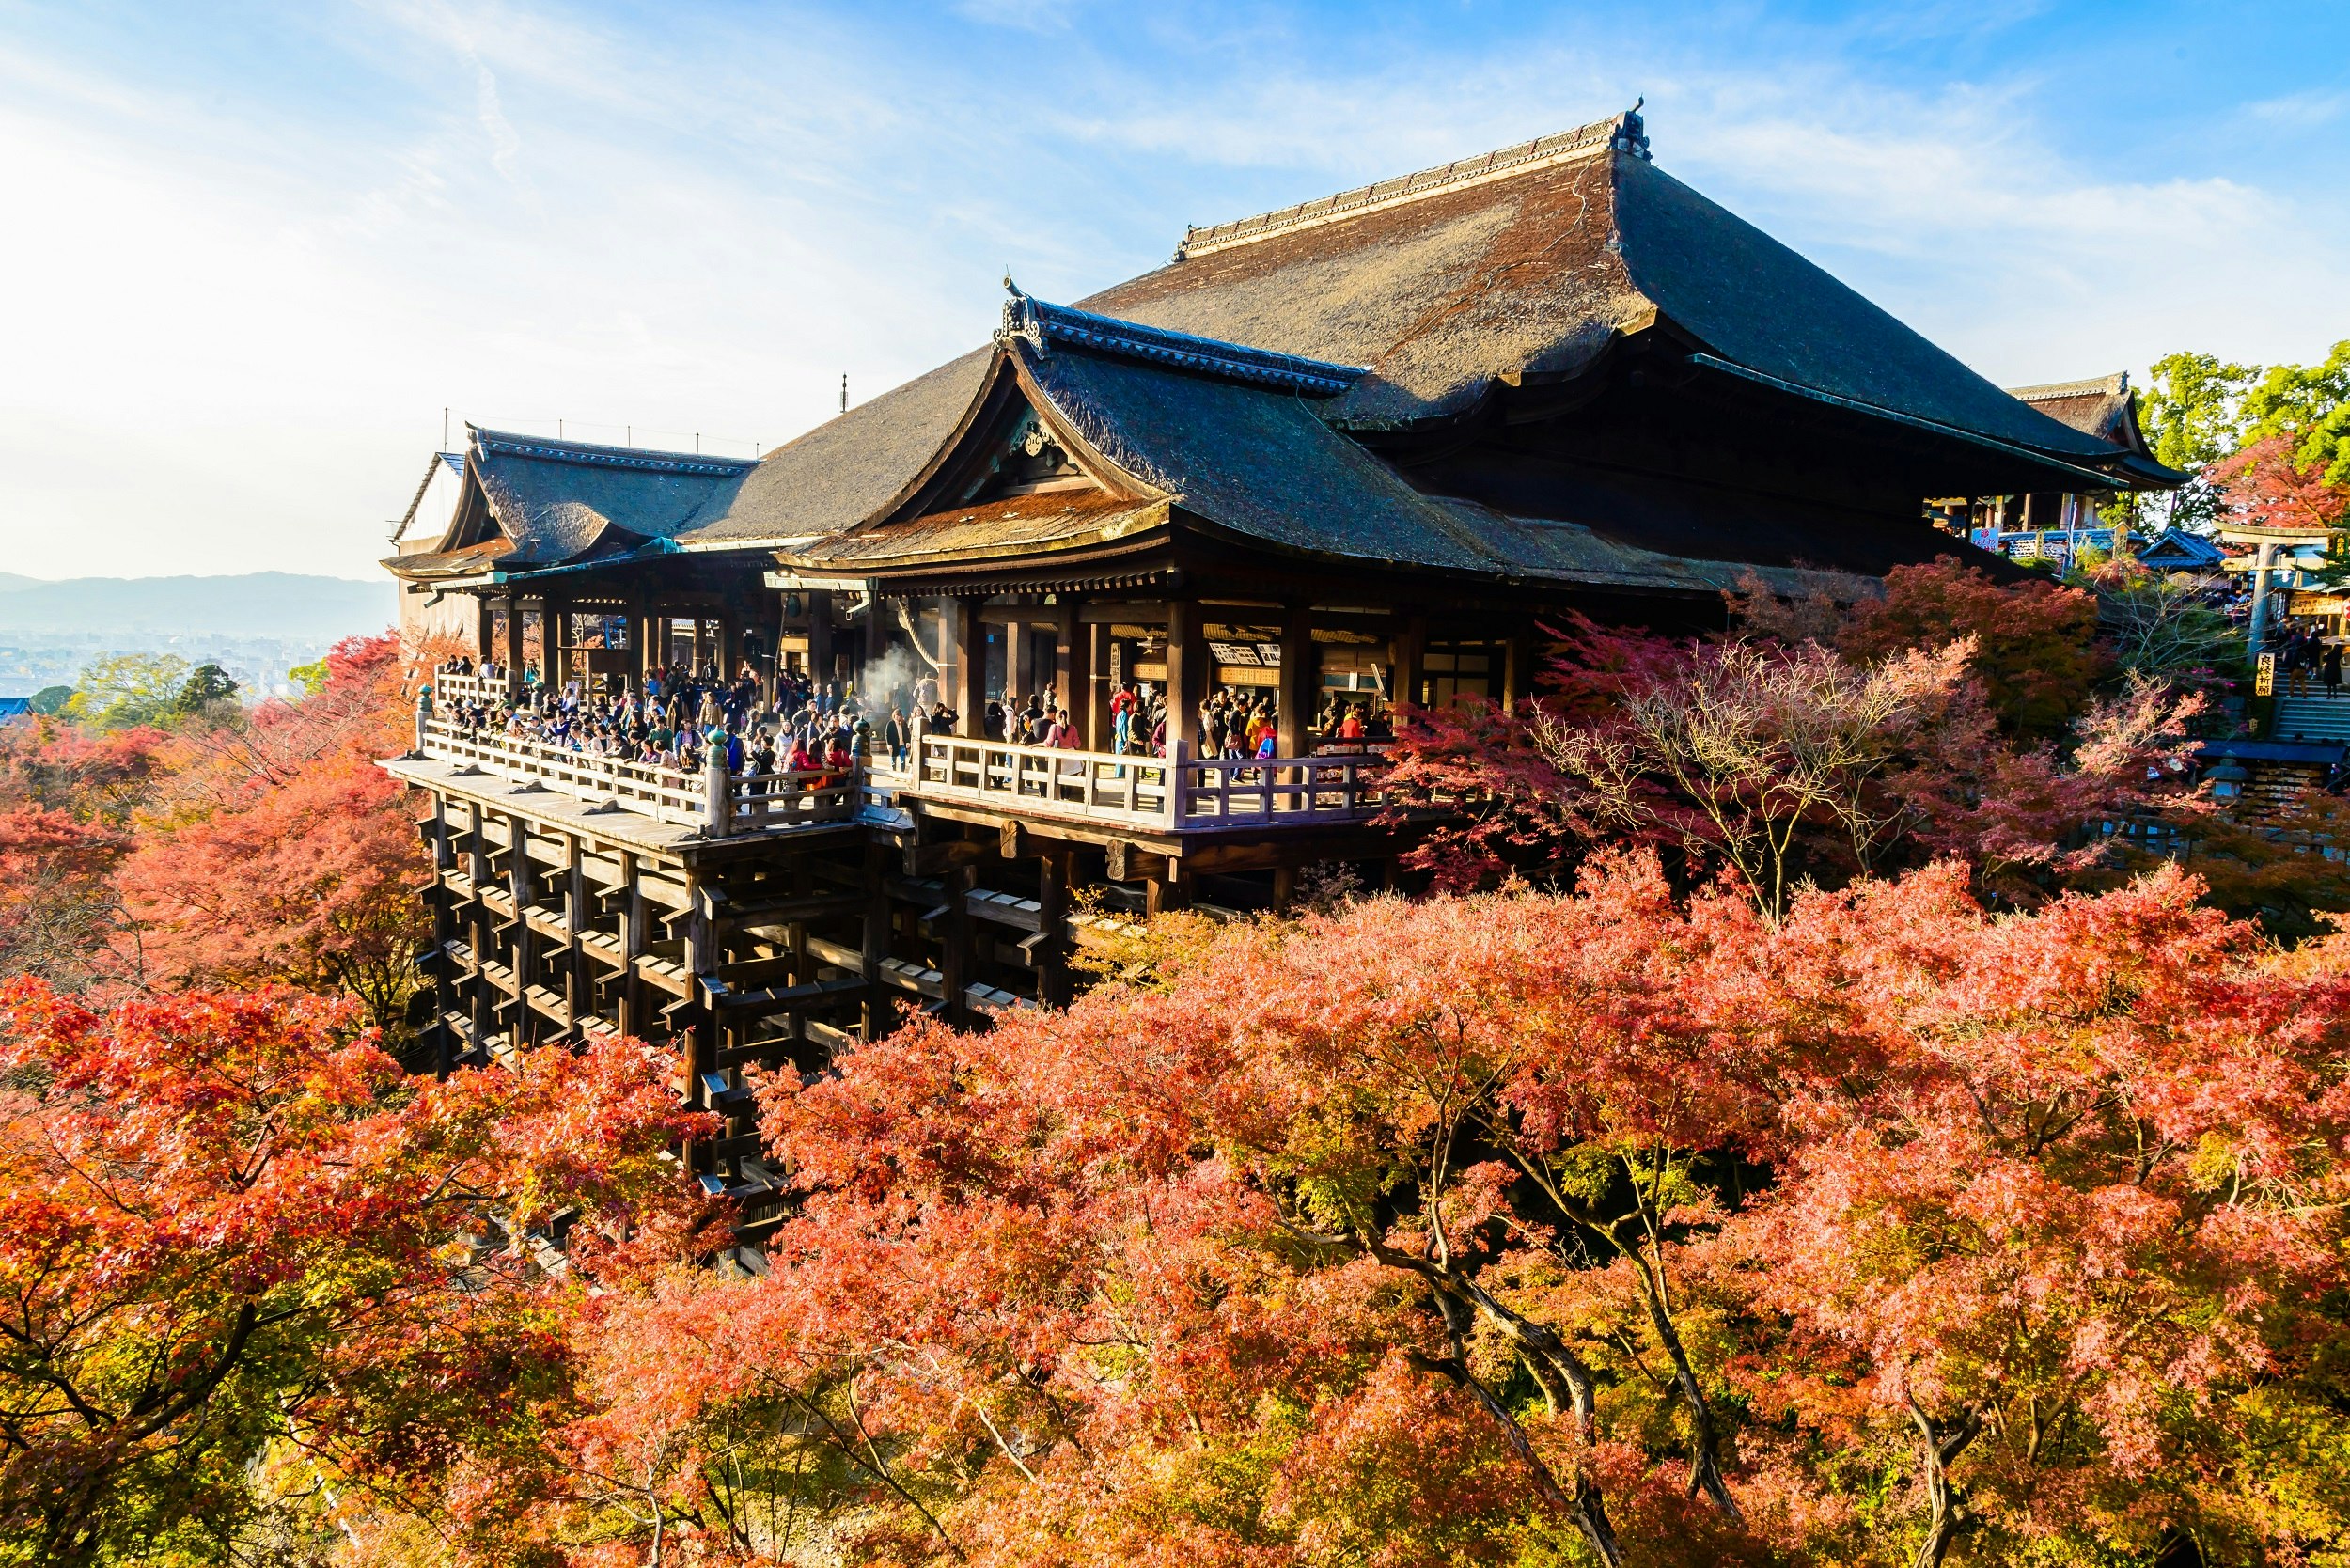 The traditional temple of Kiyomizu-dera rises out of a forest covered in cherry blossoms; its wooden verandah offers views over the countryside.